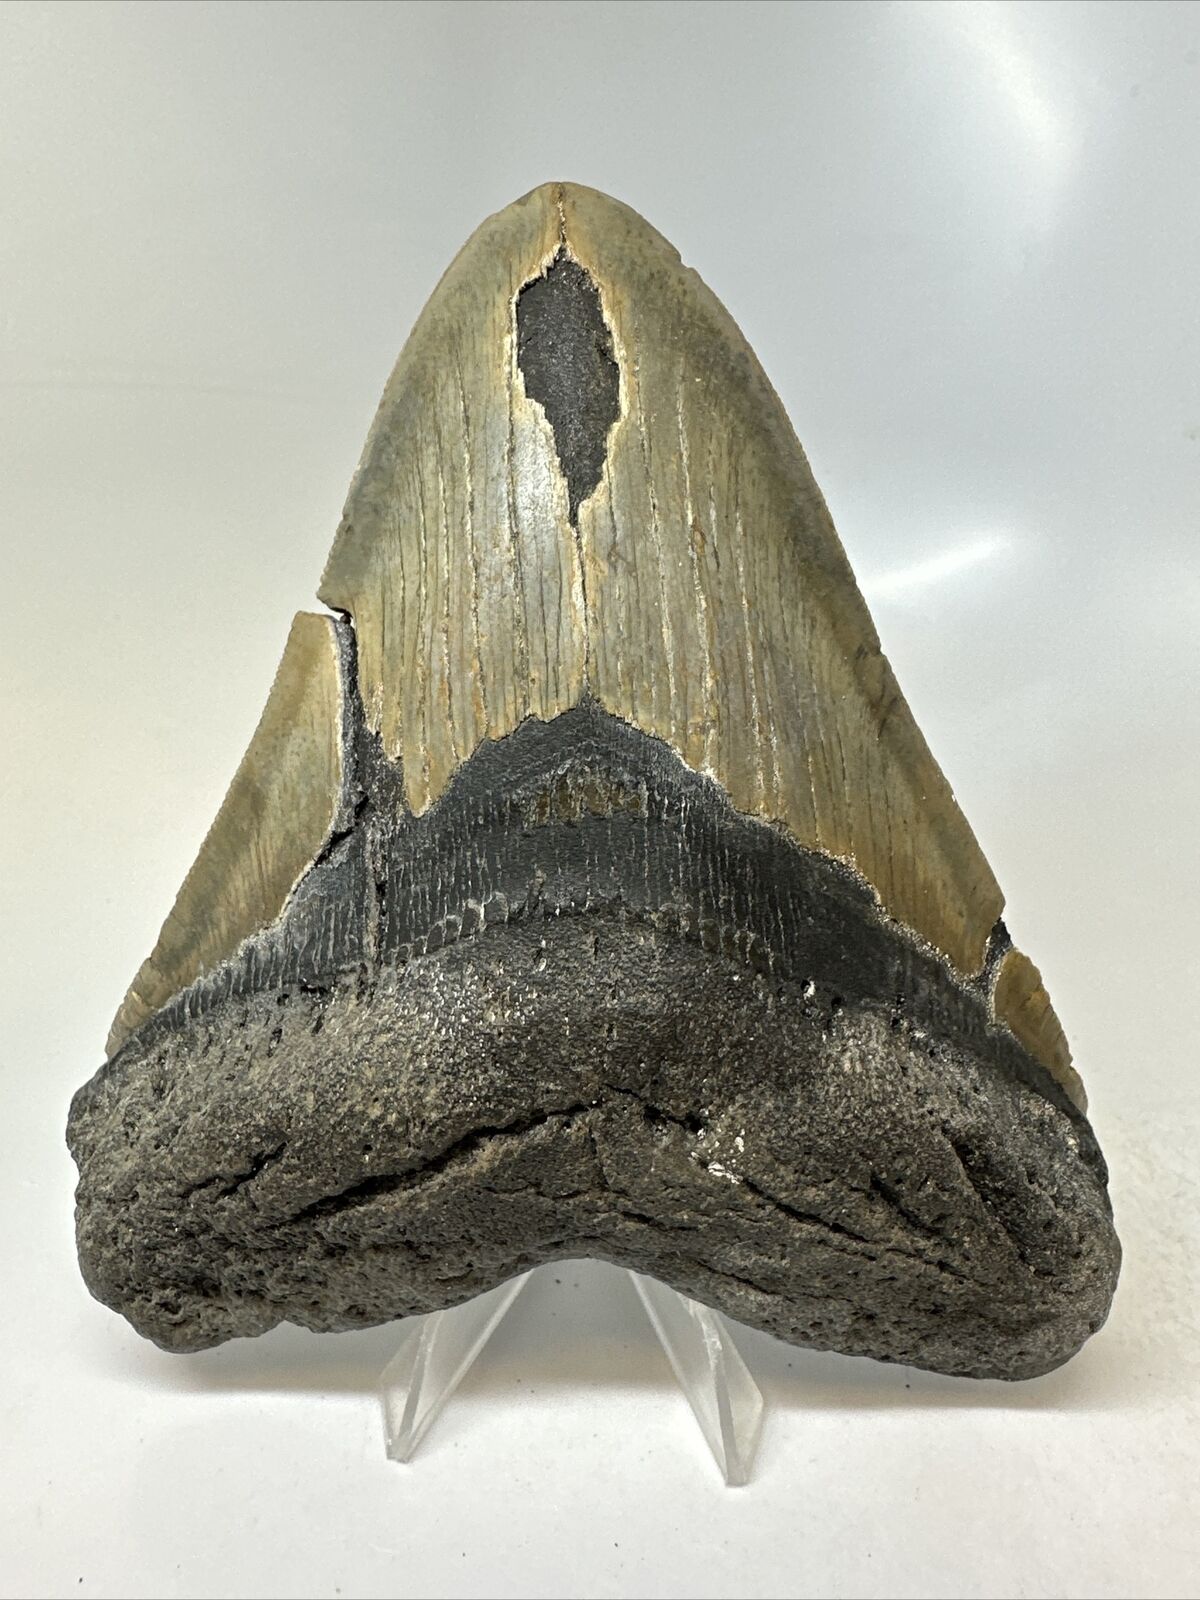 Megalodon Shark Tooth 5.64” Huge - Authentic Fossil - Wide 15808